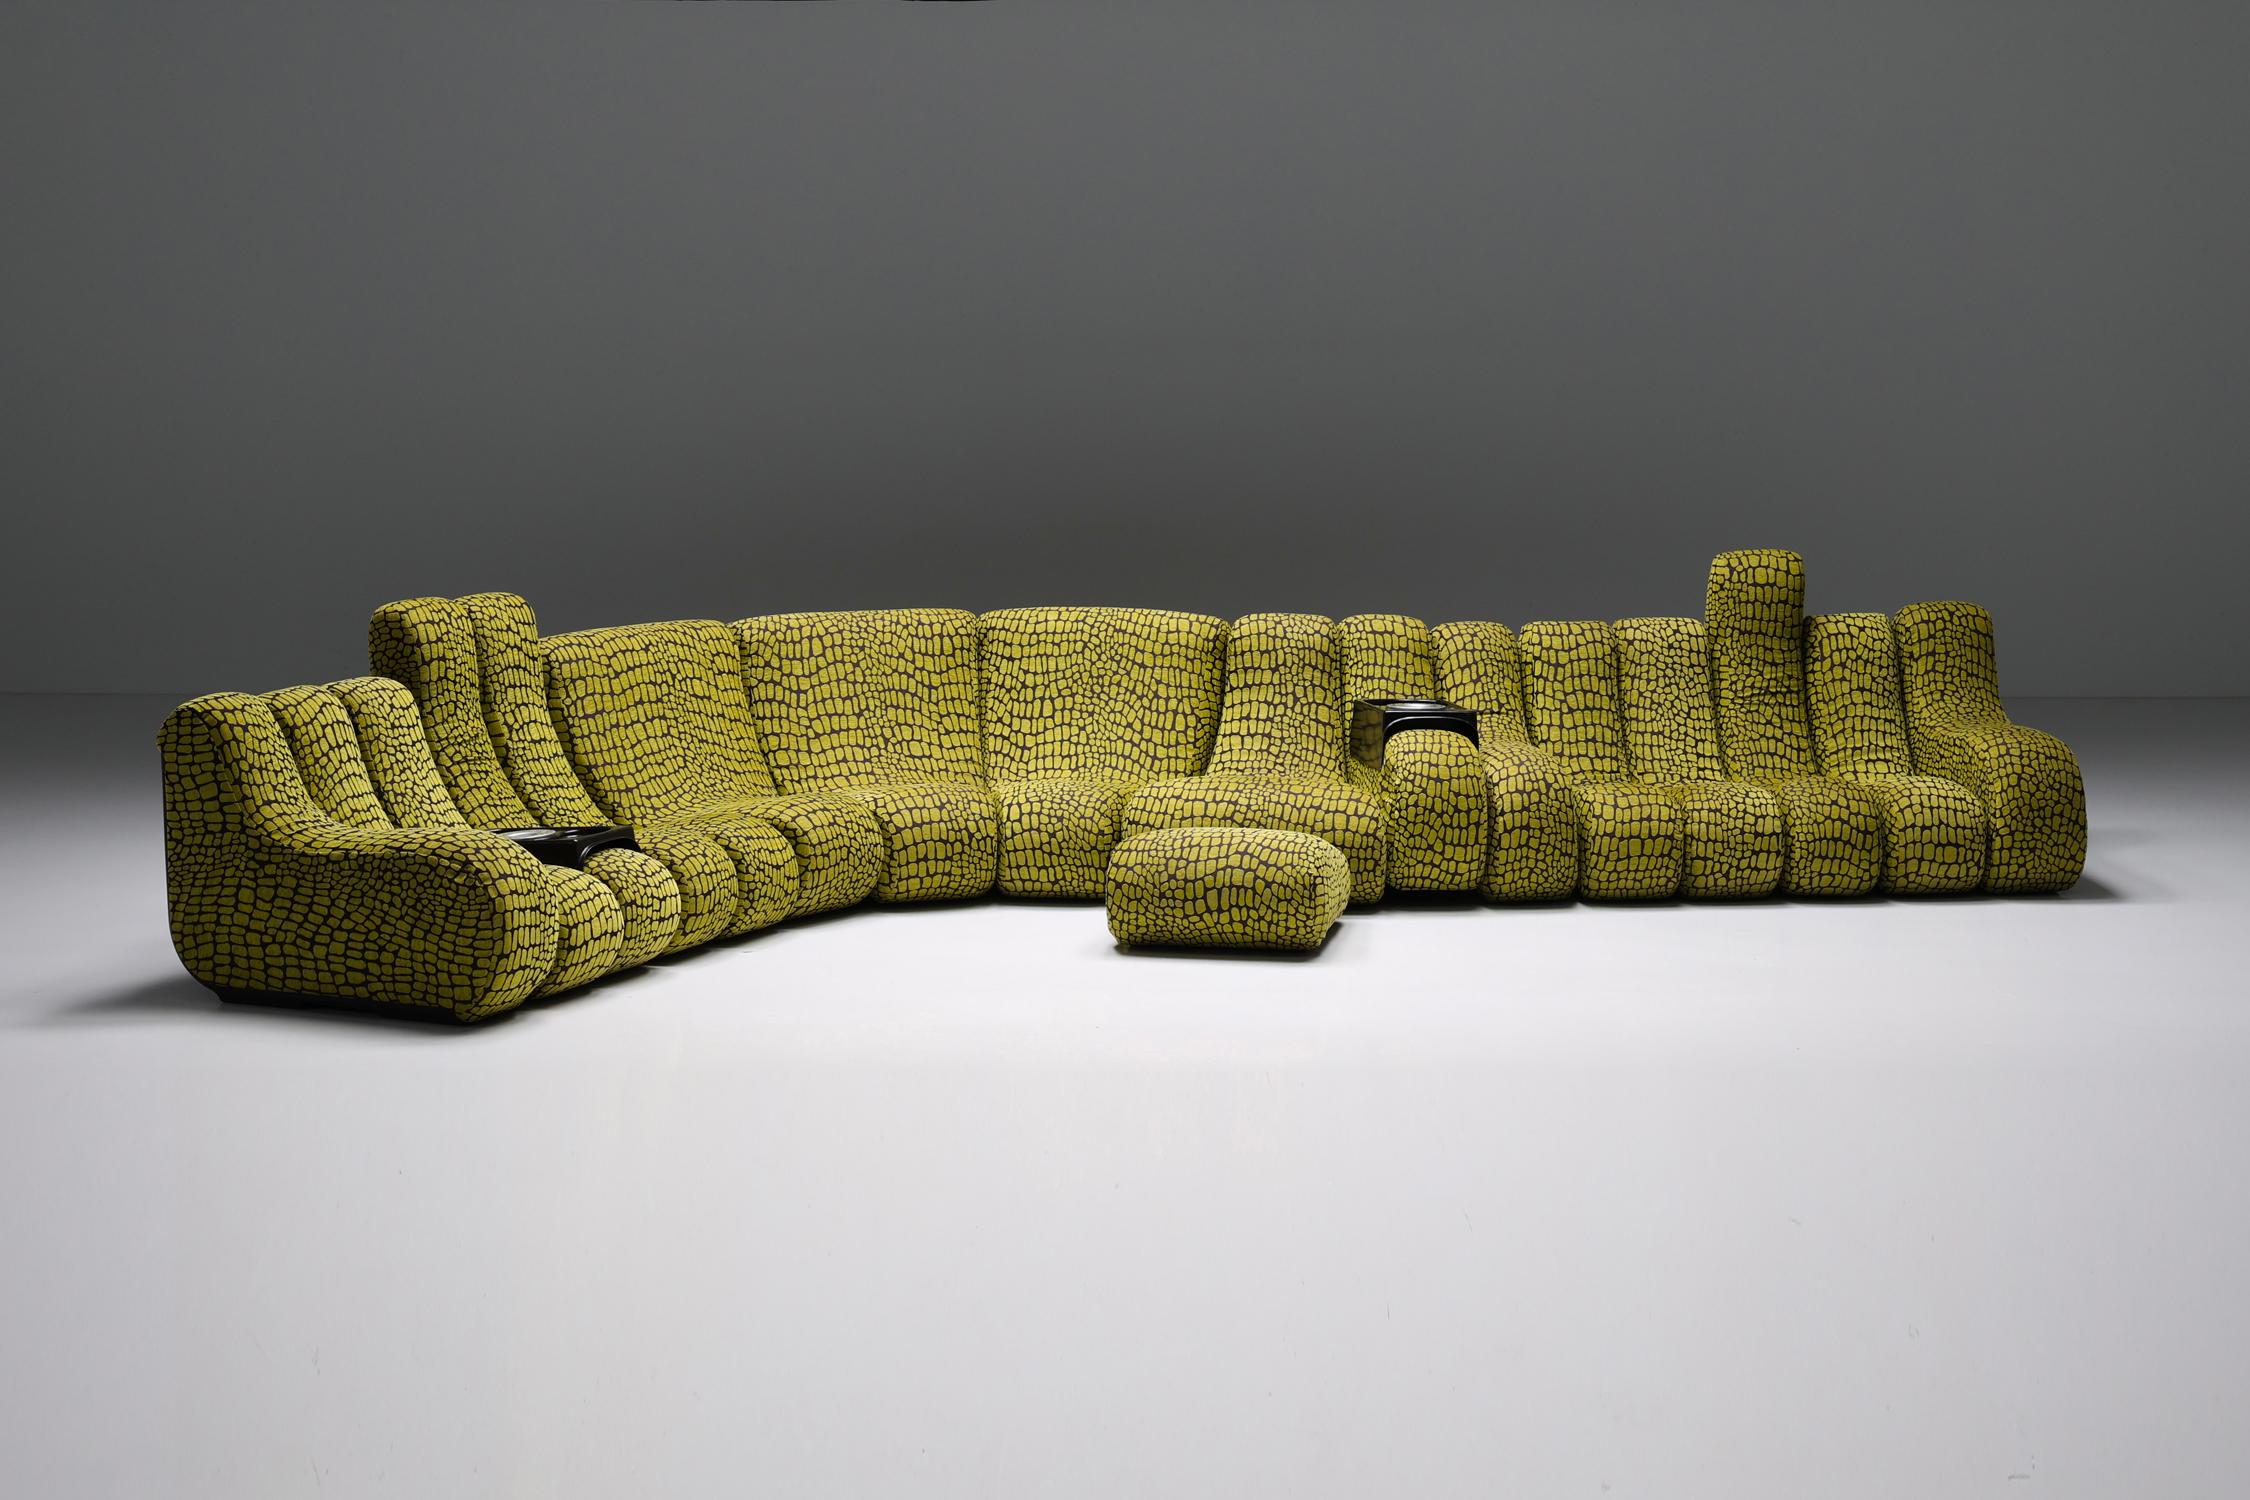 Modular Sofa; Sectional Sofa; Luigi Colani; Rosenthal; Germany; German Design; Minimalist Space Age; Upholstery; 1970s;

A rare modular sofa designed in the 1970s by recently deceased German Space Age designer pioneer Luigi Colani. This iconic